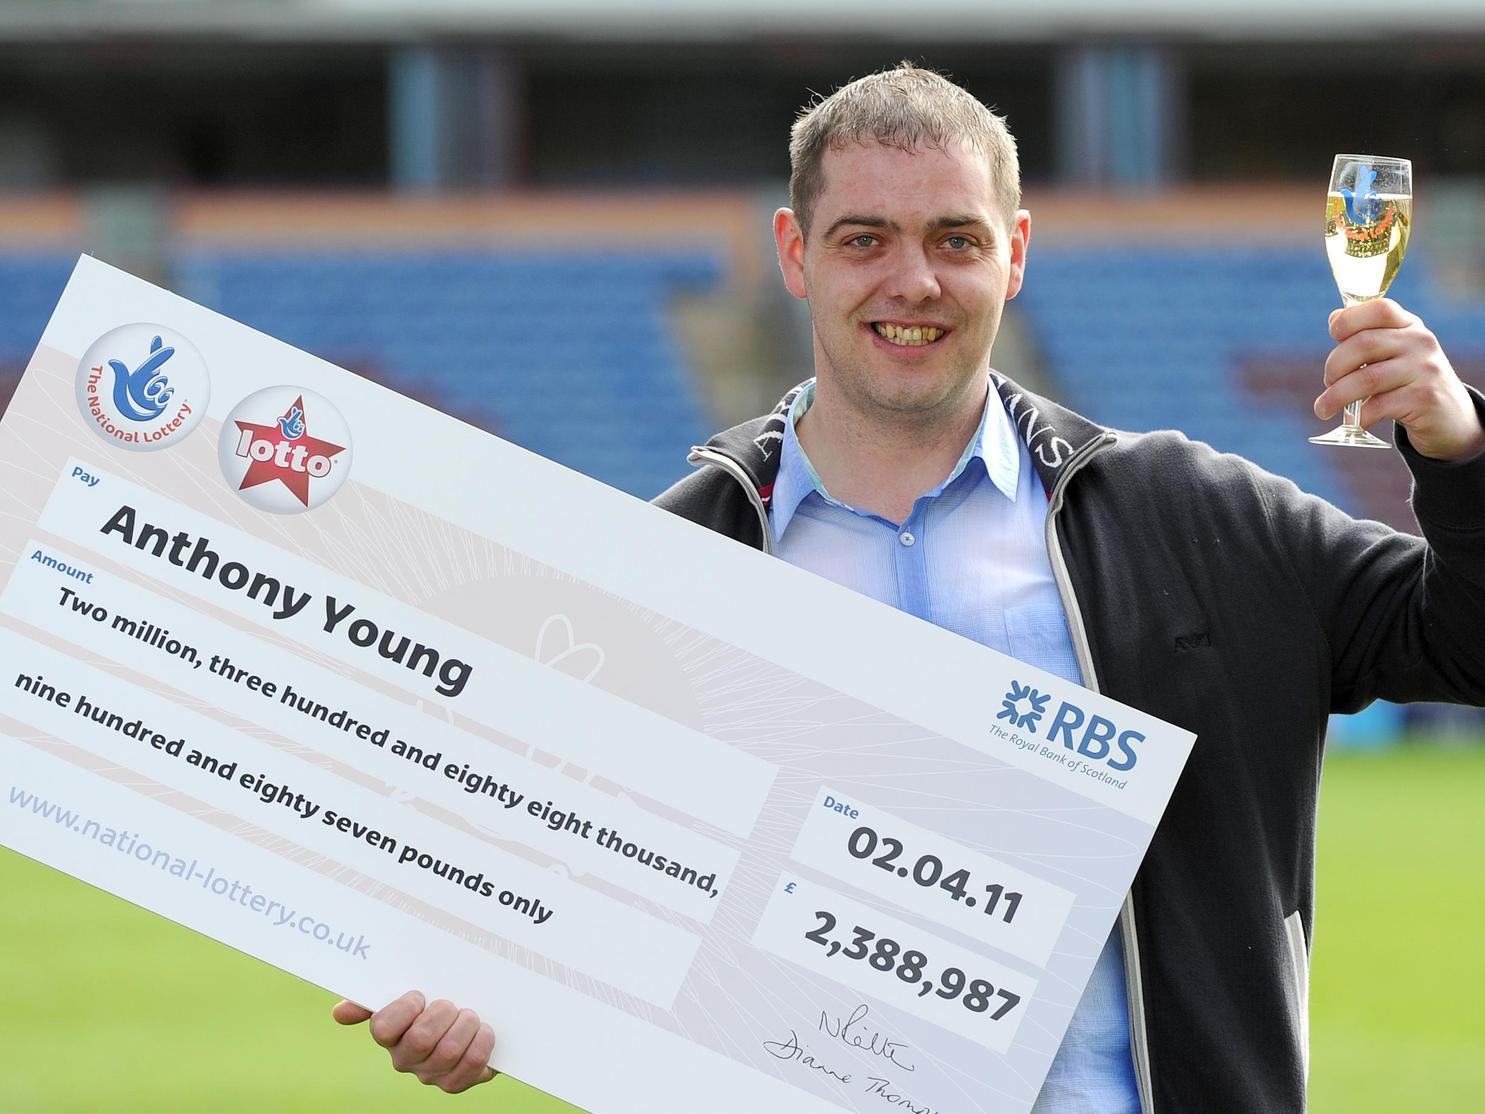 Burnley FC fan Anthony Young celebrates his 2.38 million lottery win at Turf Moor in April 2011